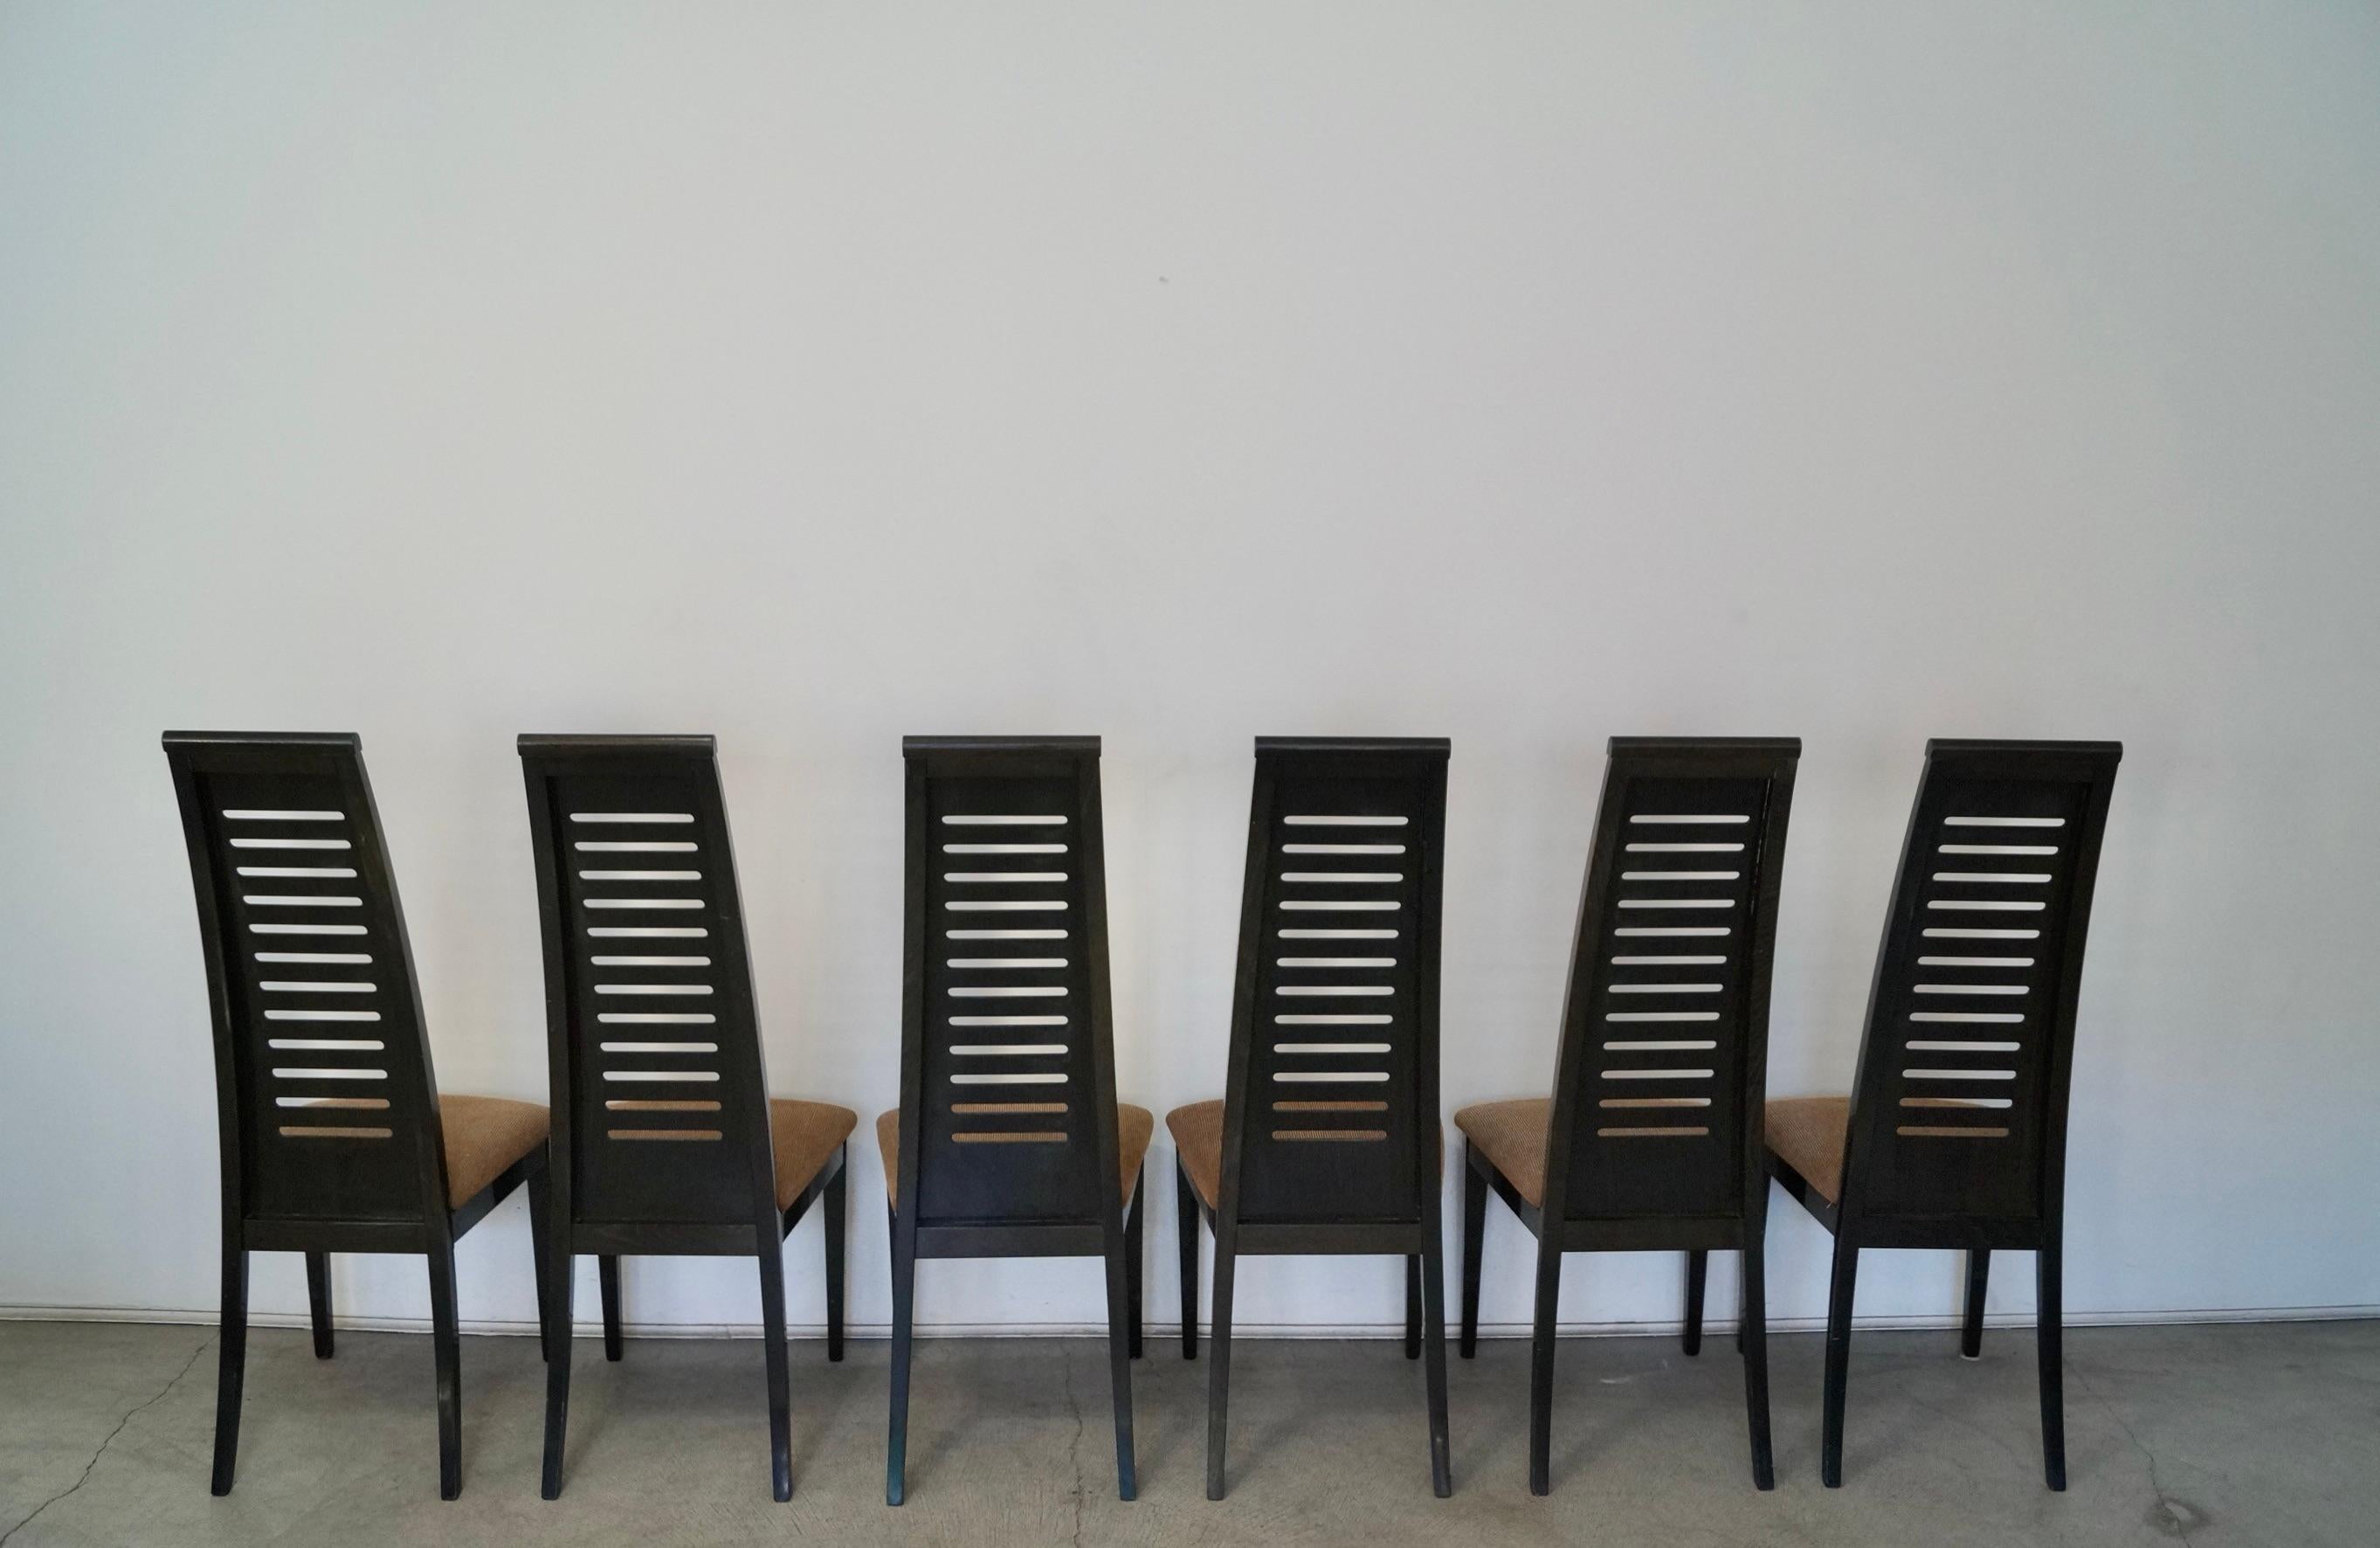 Postmodern Ello Furniture Pietro Costantini Dining Chairs - Set of 6 In Good Condition For Sale In Burbank, CA